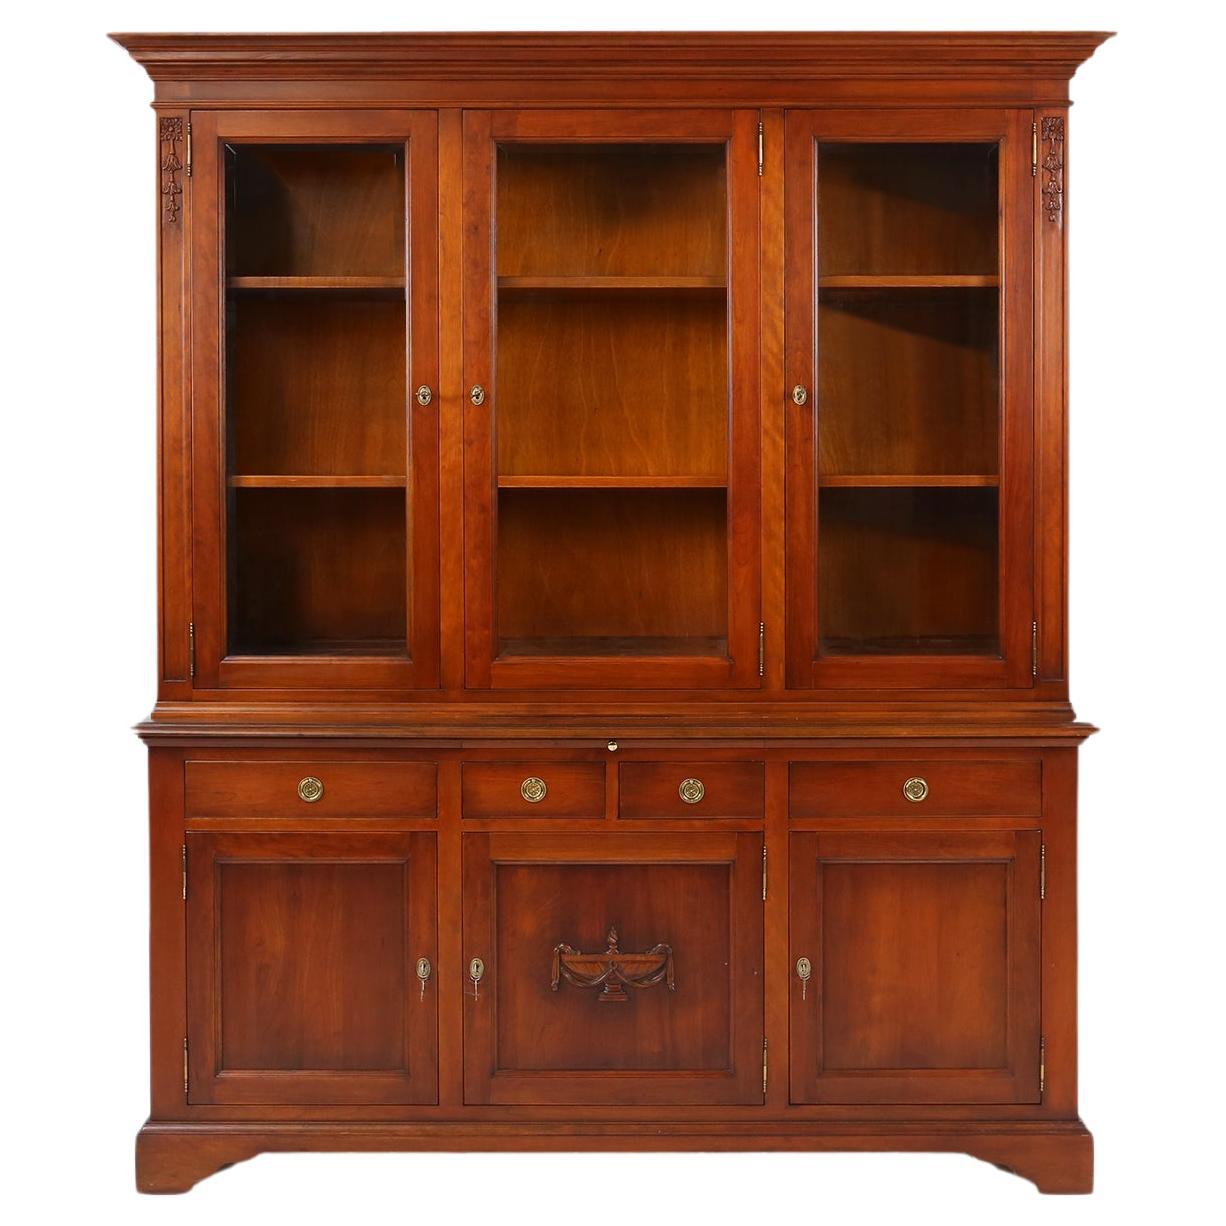 English Wooden Bookcase Cabinet, 1950s For Sale